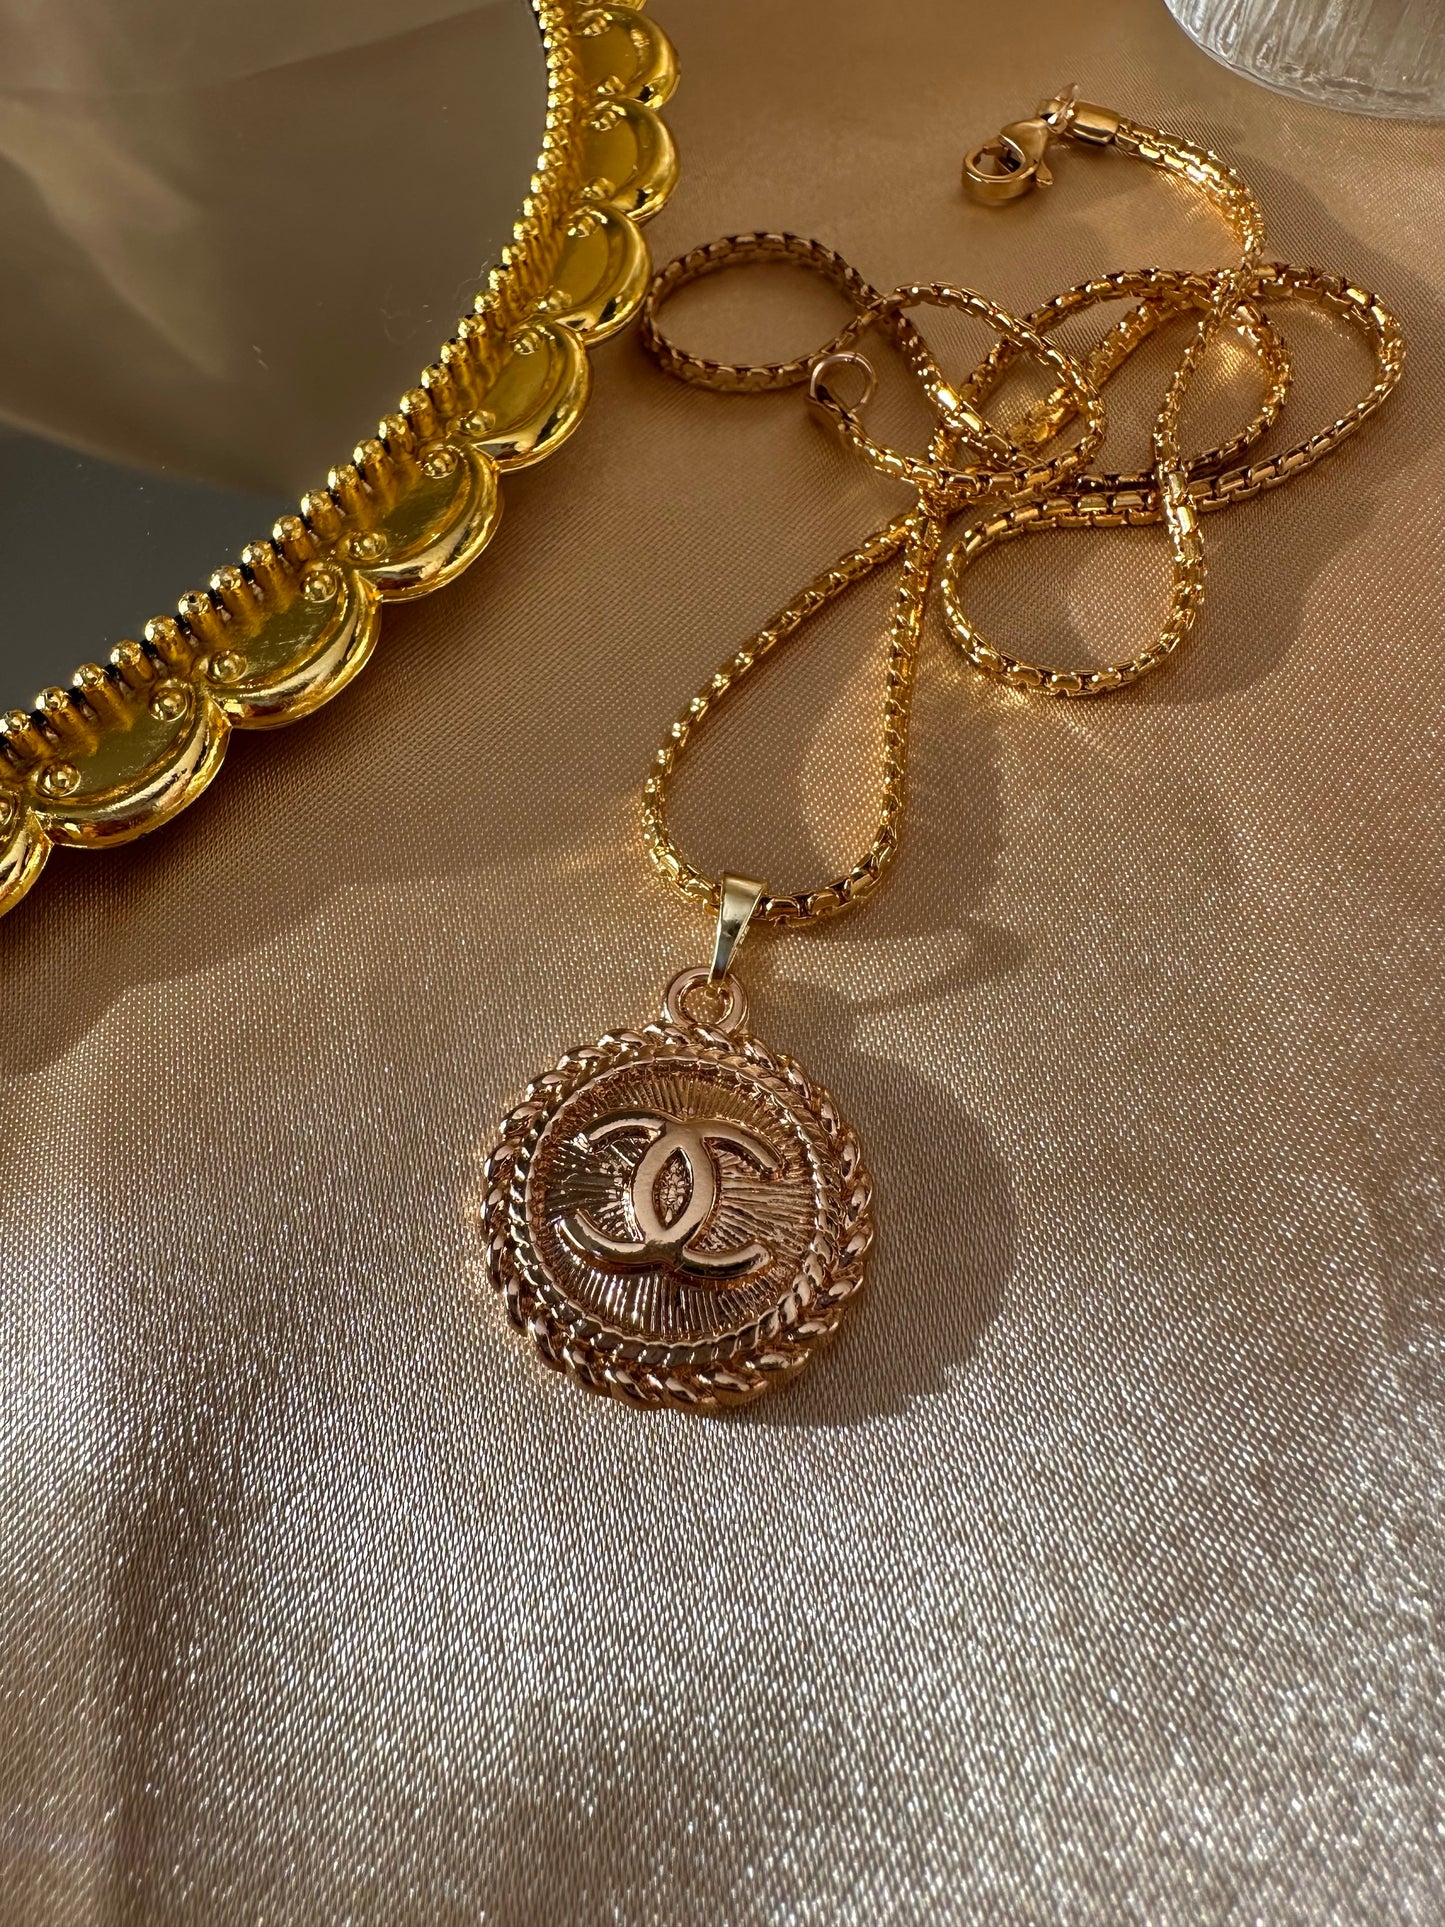 Chanel Medallion Necklace